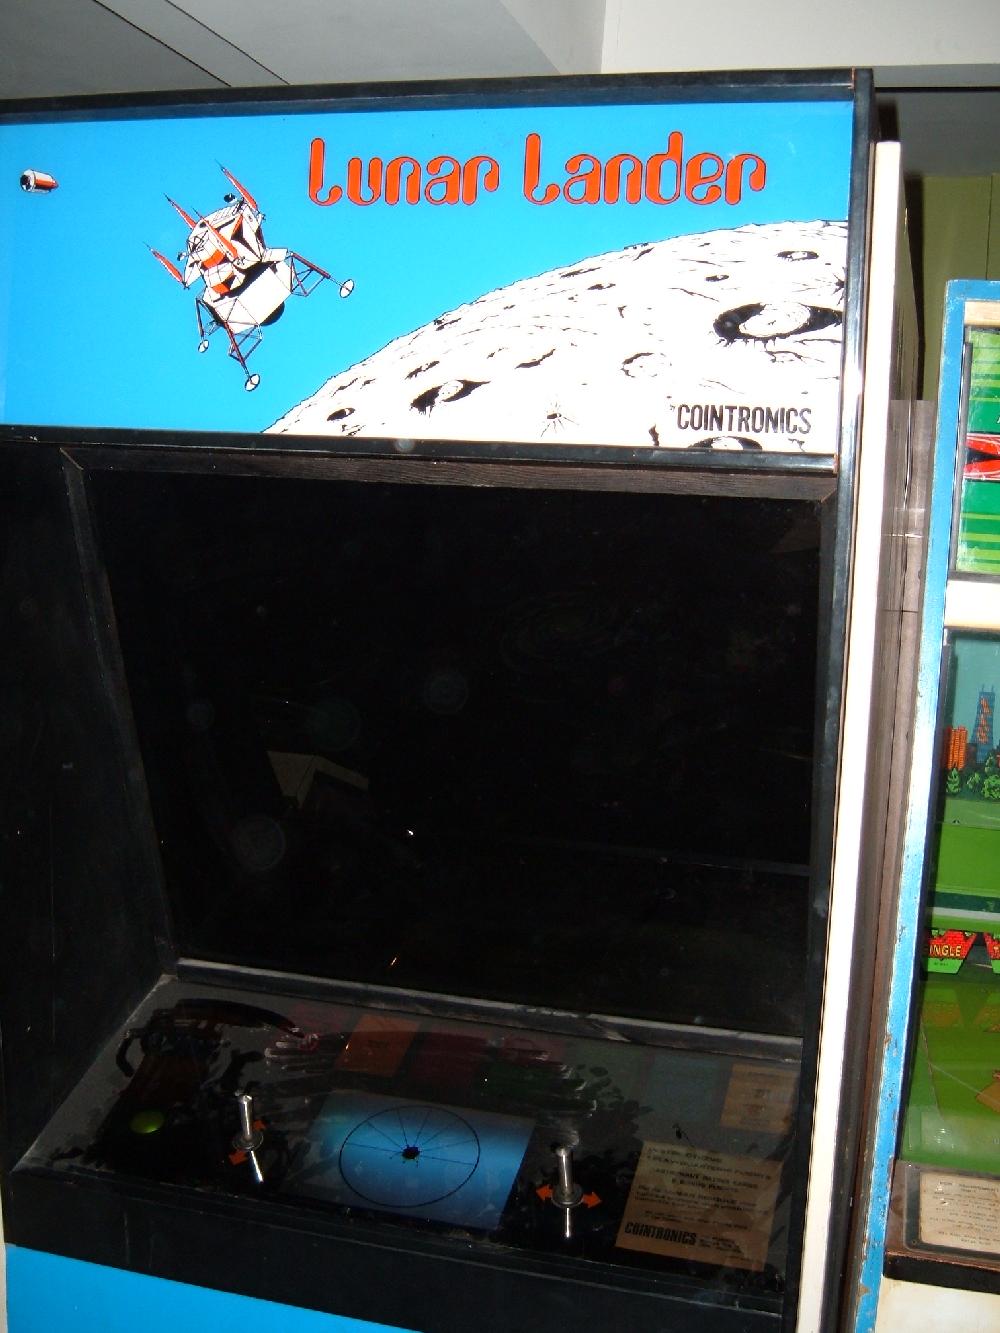 Cointronics Lunar Lander Space Flight coin operated arcade game 1970